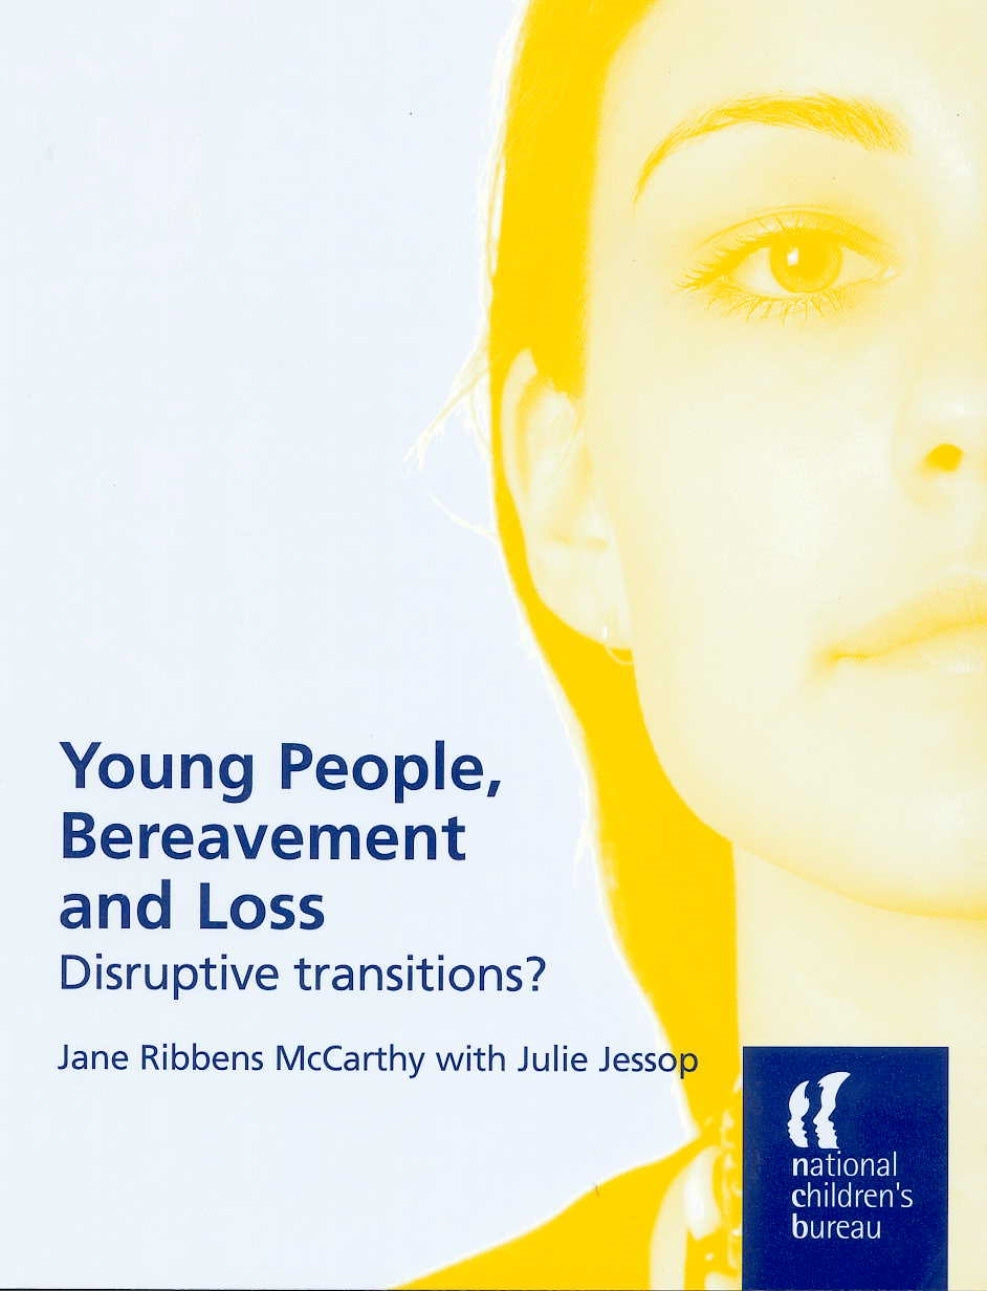 Young People, Bereavement and Loss by Jane Ribbens Ribbens McCarthy, Julie Jessop